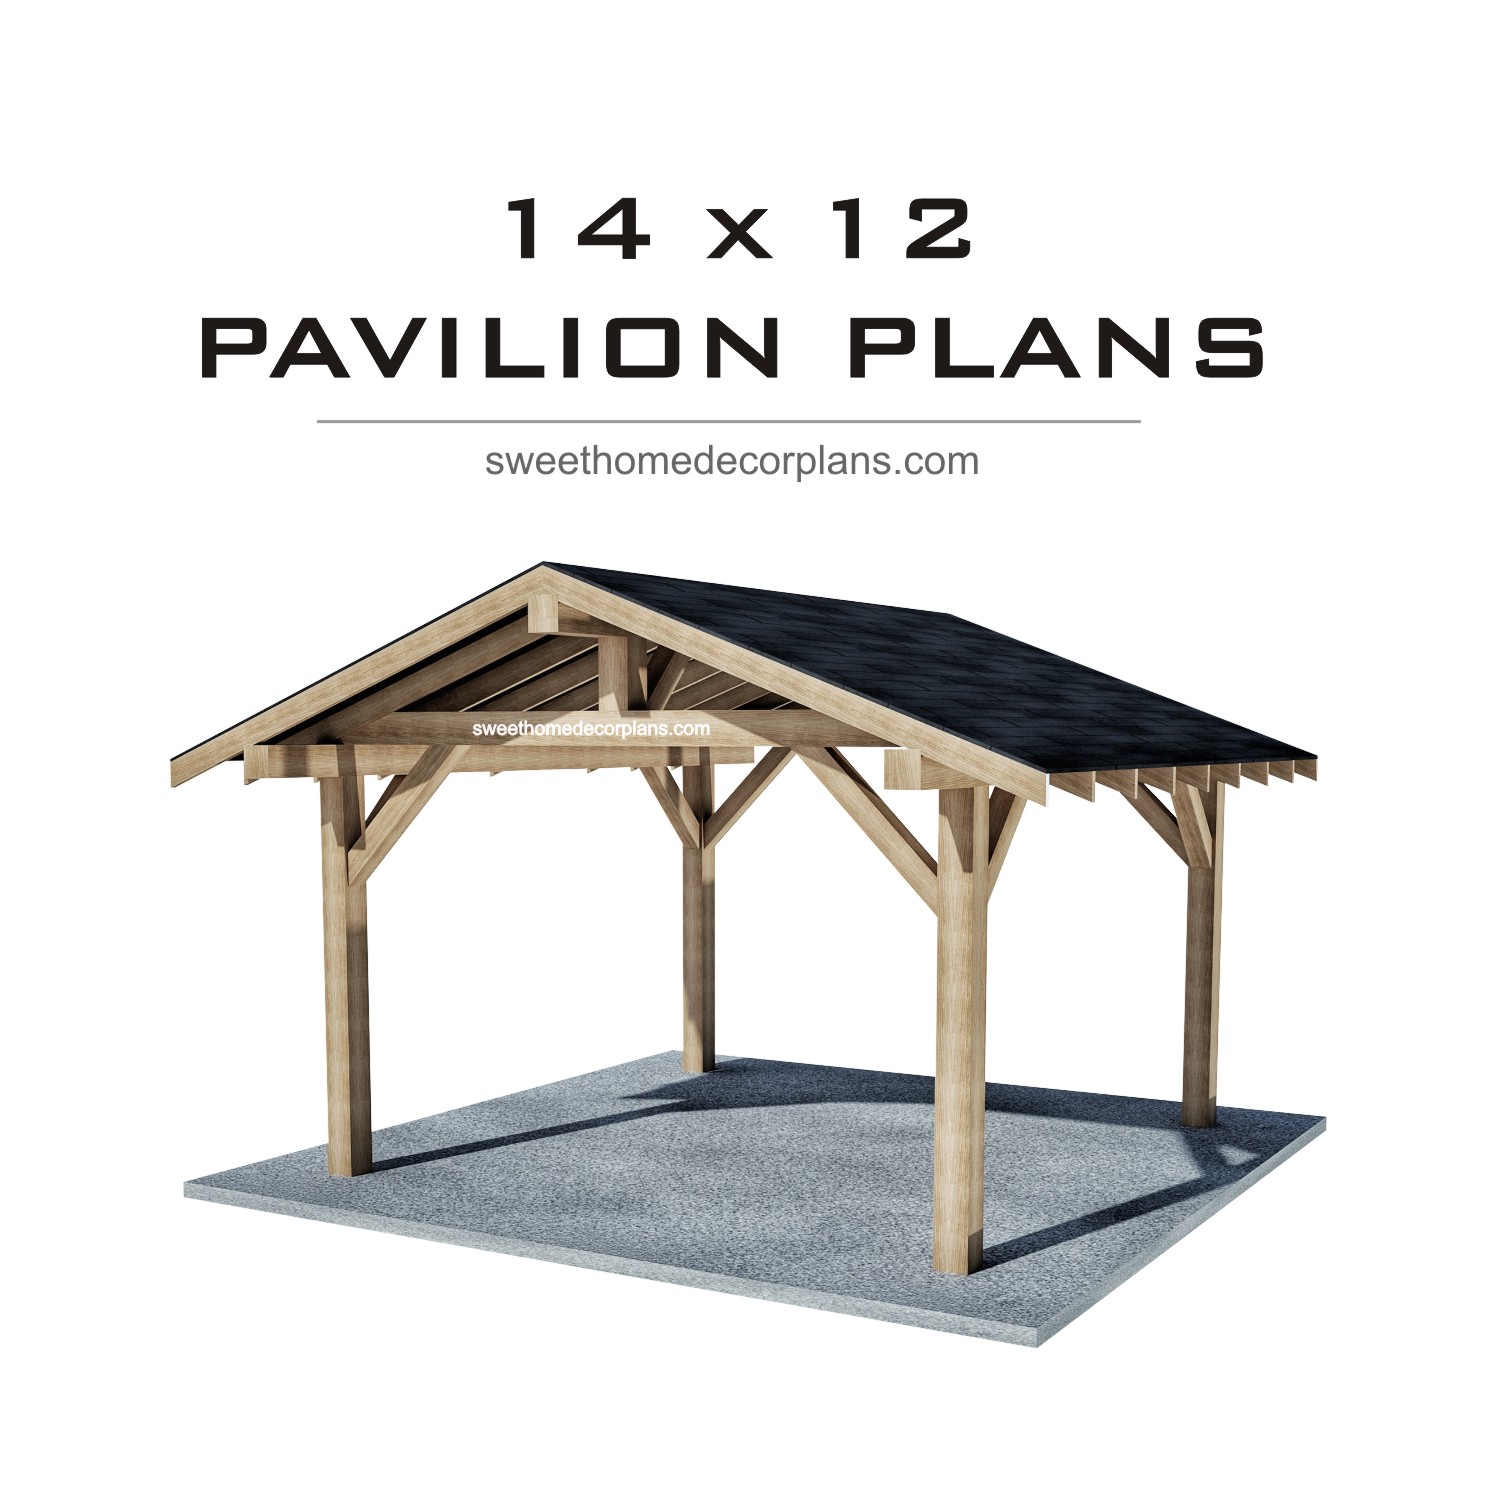 Diy-wooden-14-x-12-gable-pavilion-plans-in-pdf-for-outdoor